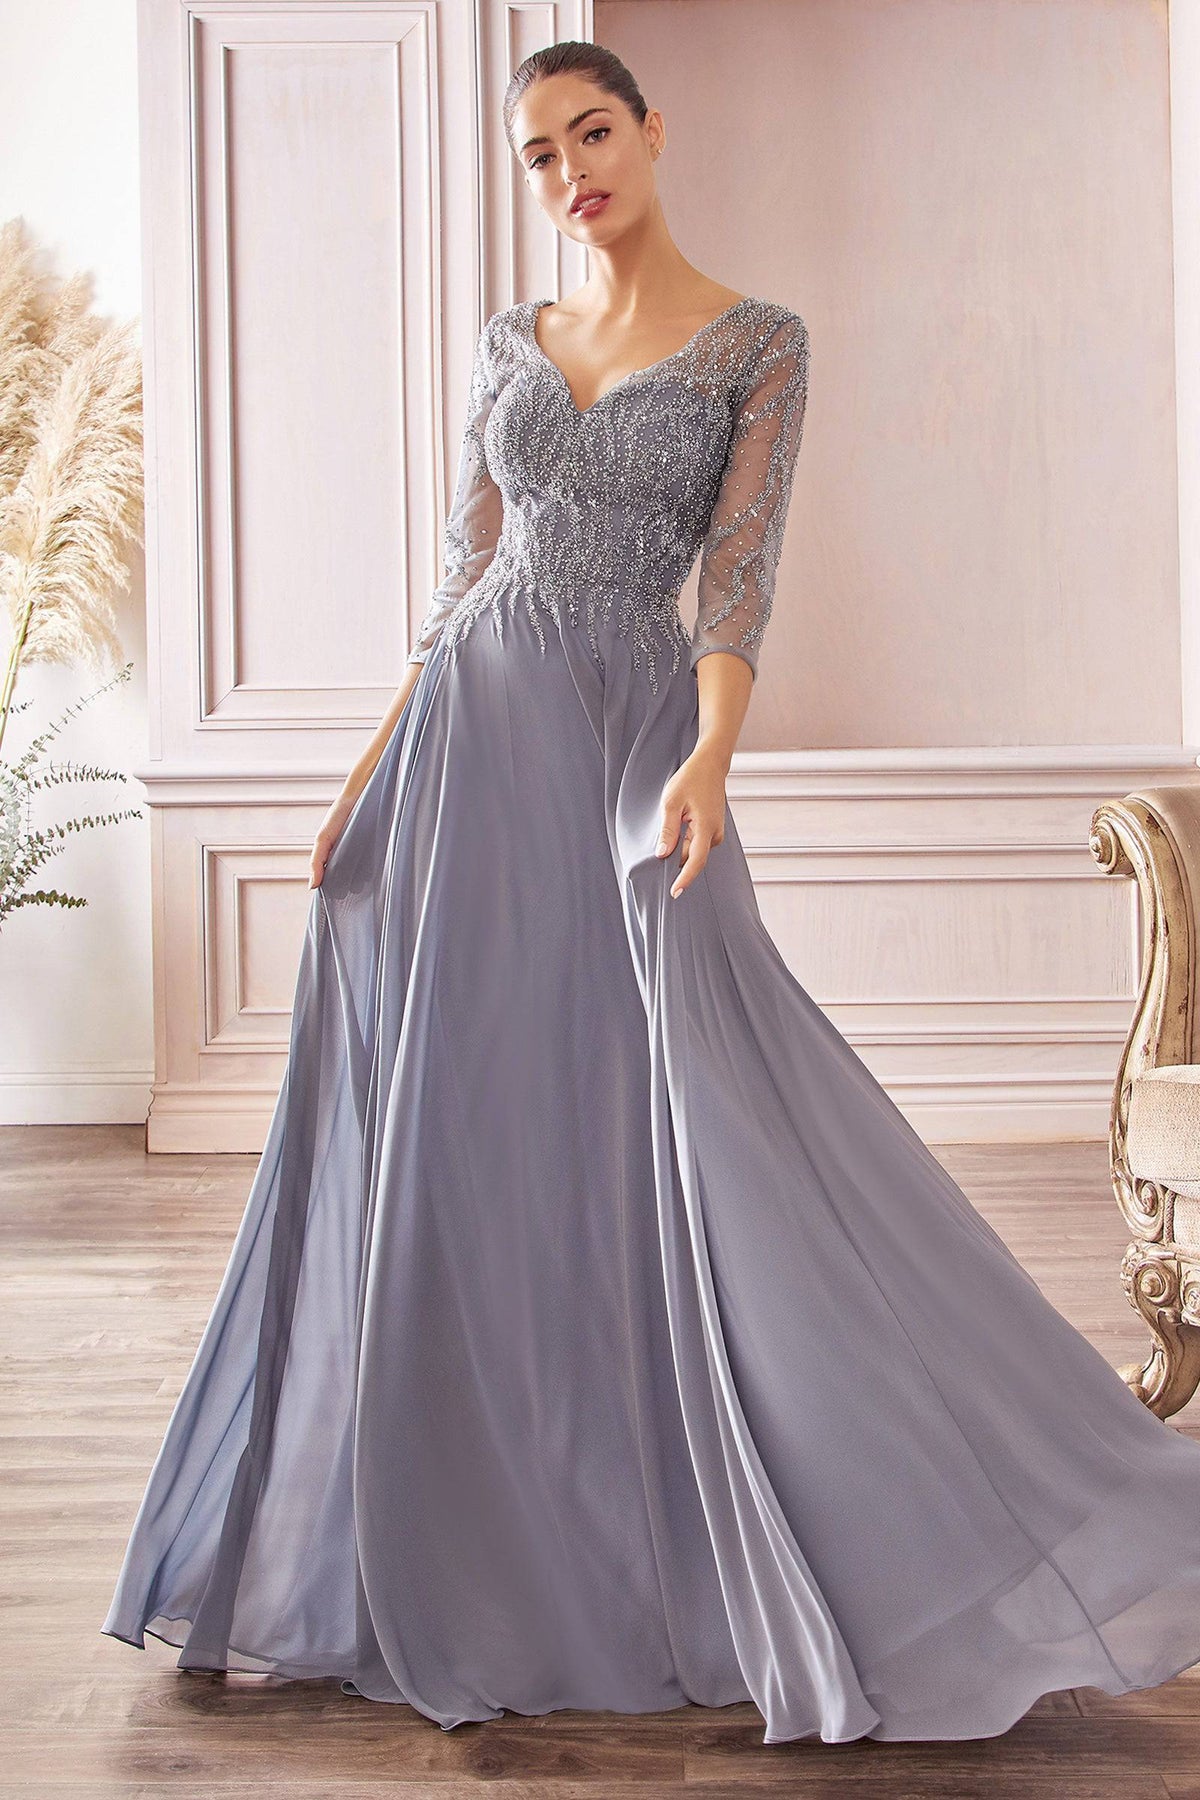 Gorgeous Long Sleeve Gown with Glitter Design on Bodice #CDCD0171 - NORMA REED